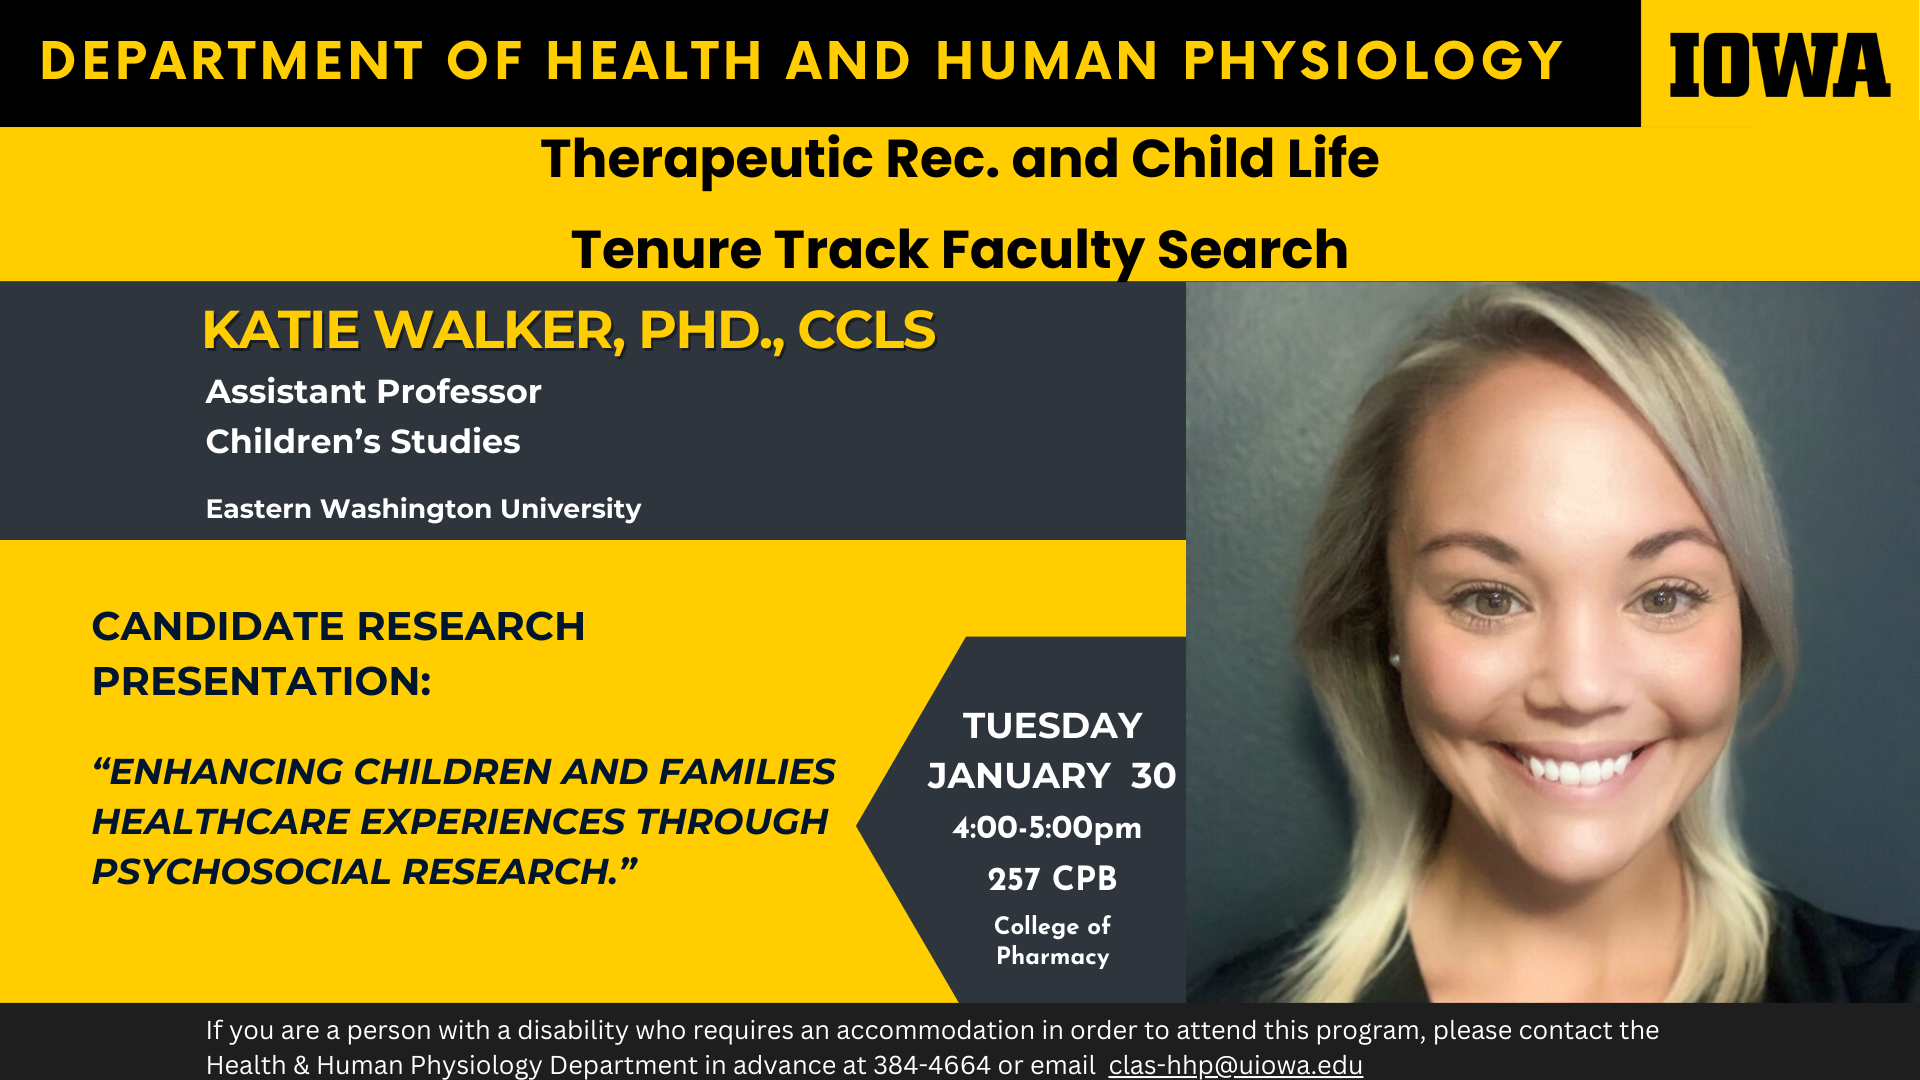 Tenure Track Faculty Search